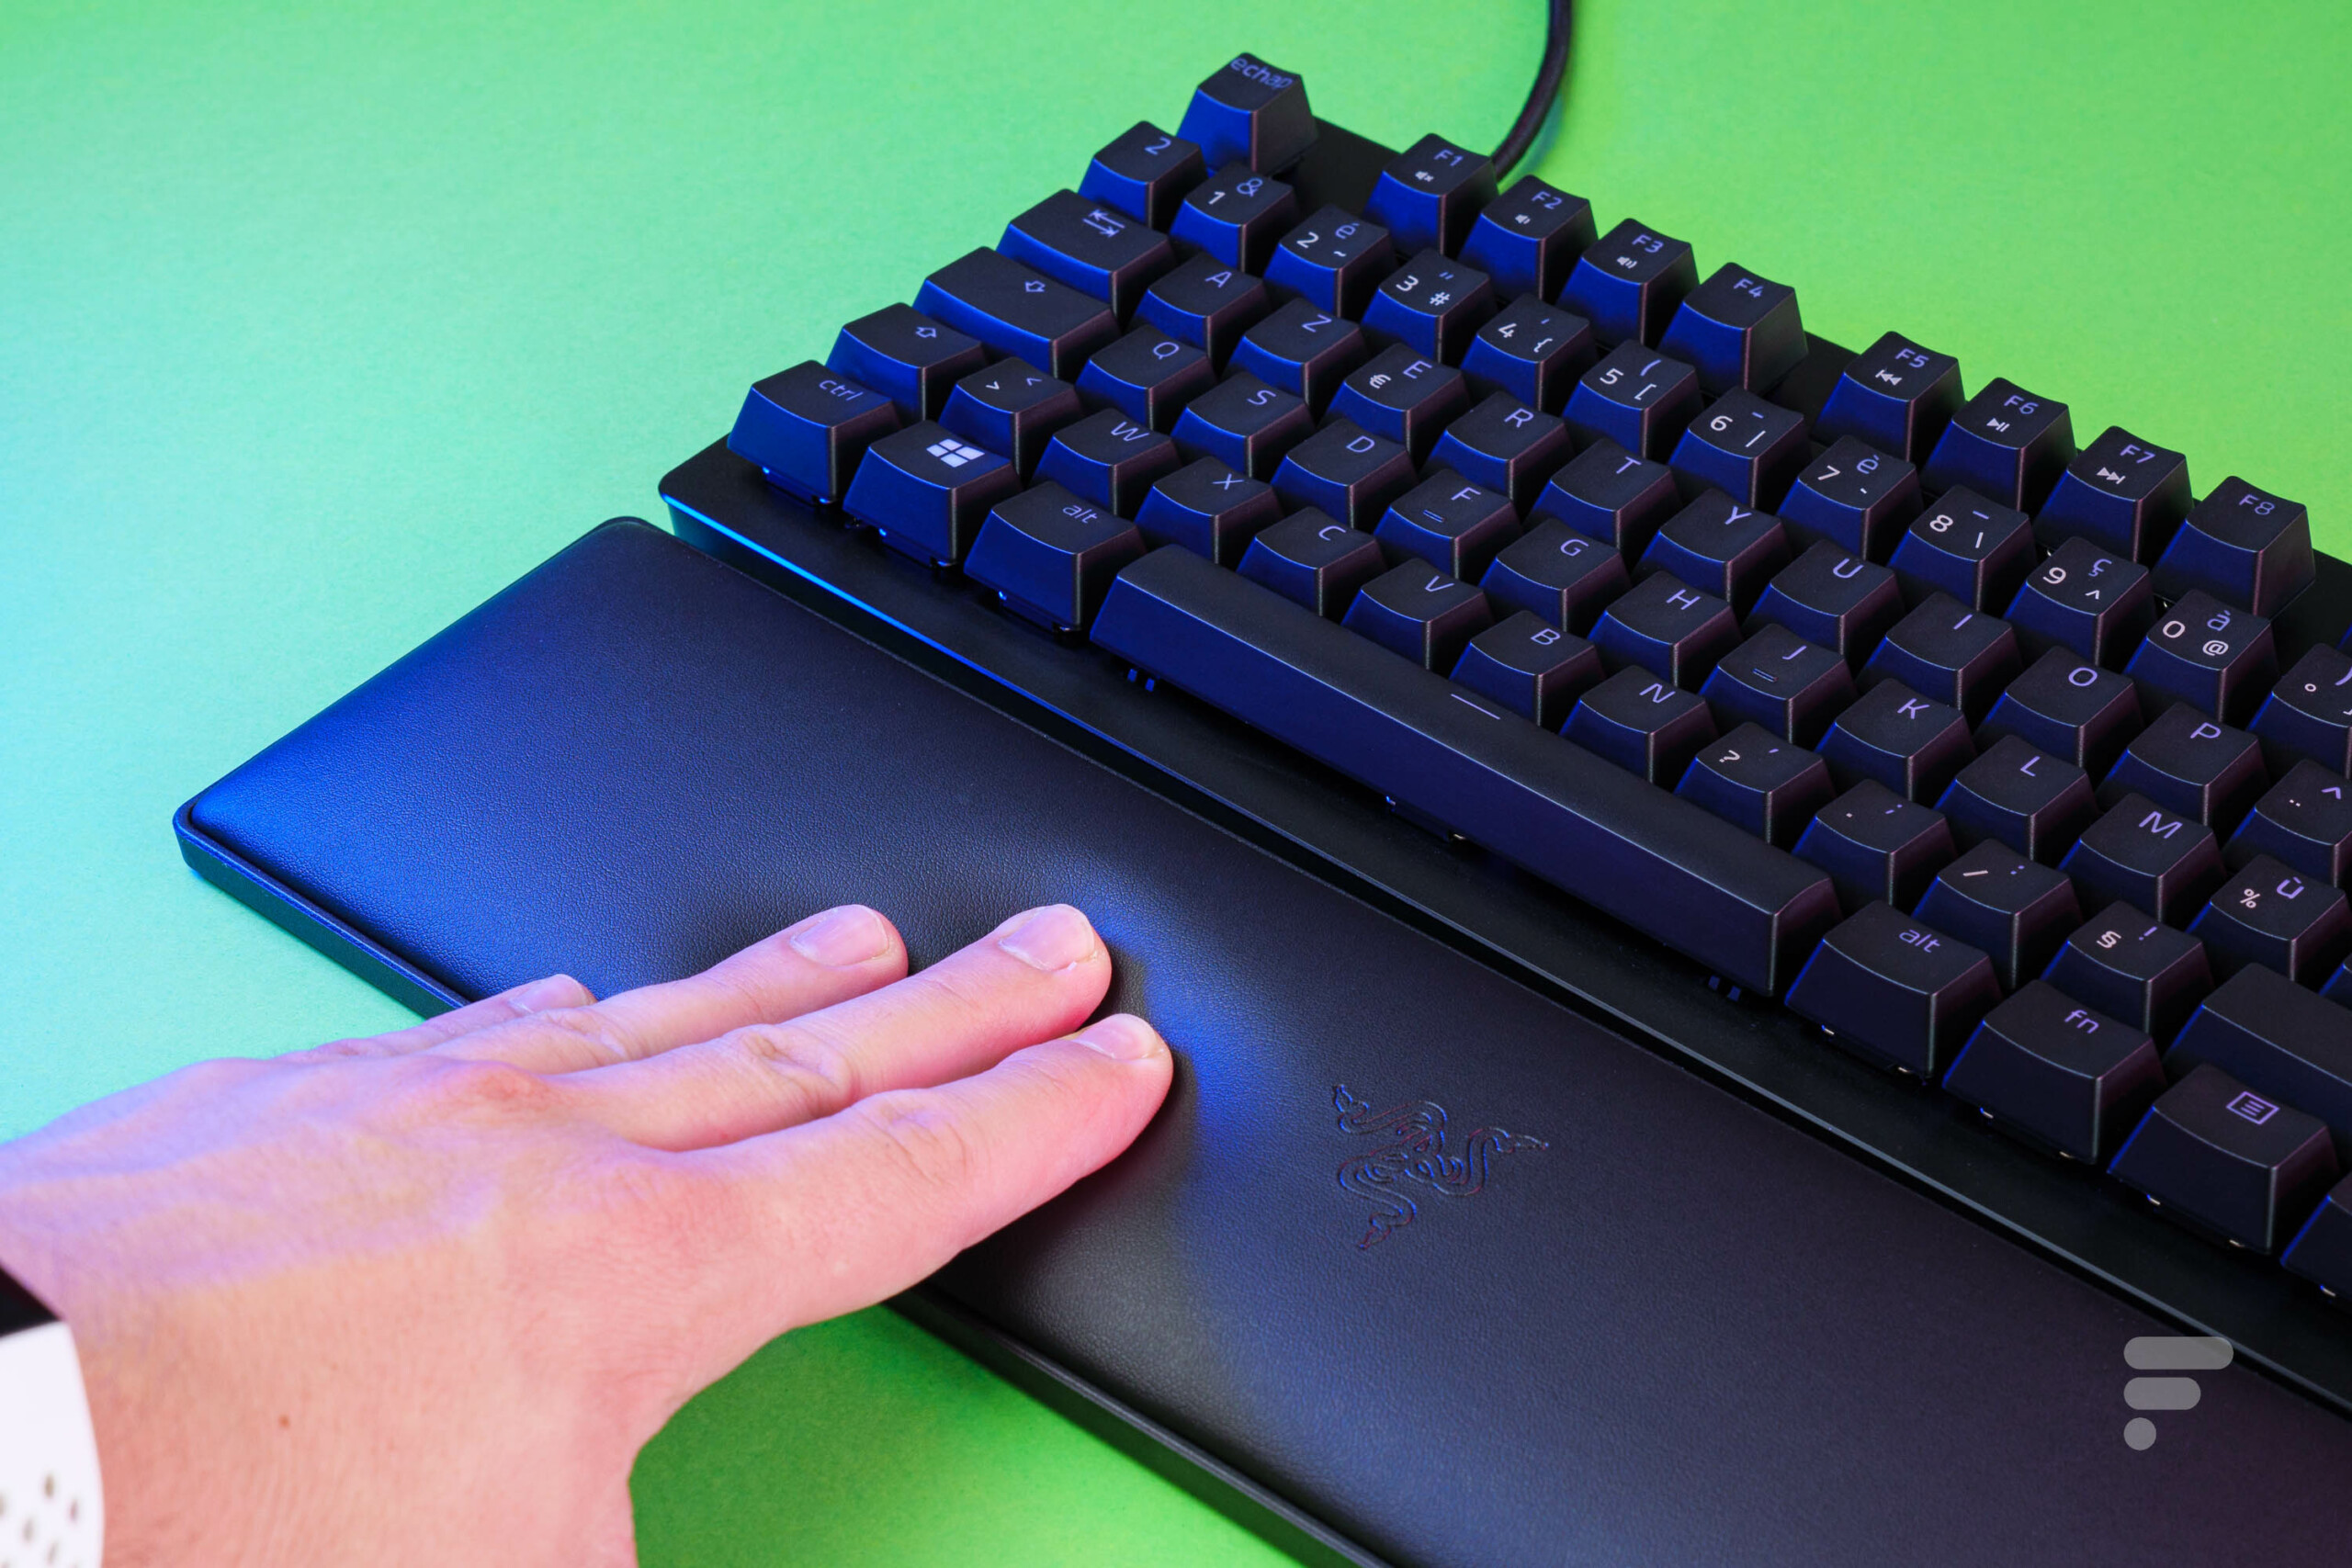 Clavier gaming - Les meilleurs claviers gaming, claviers mécaniques